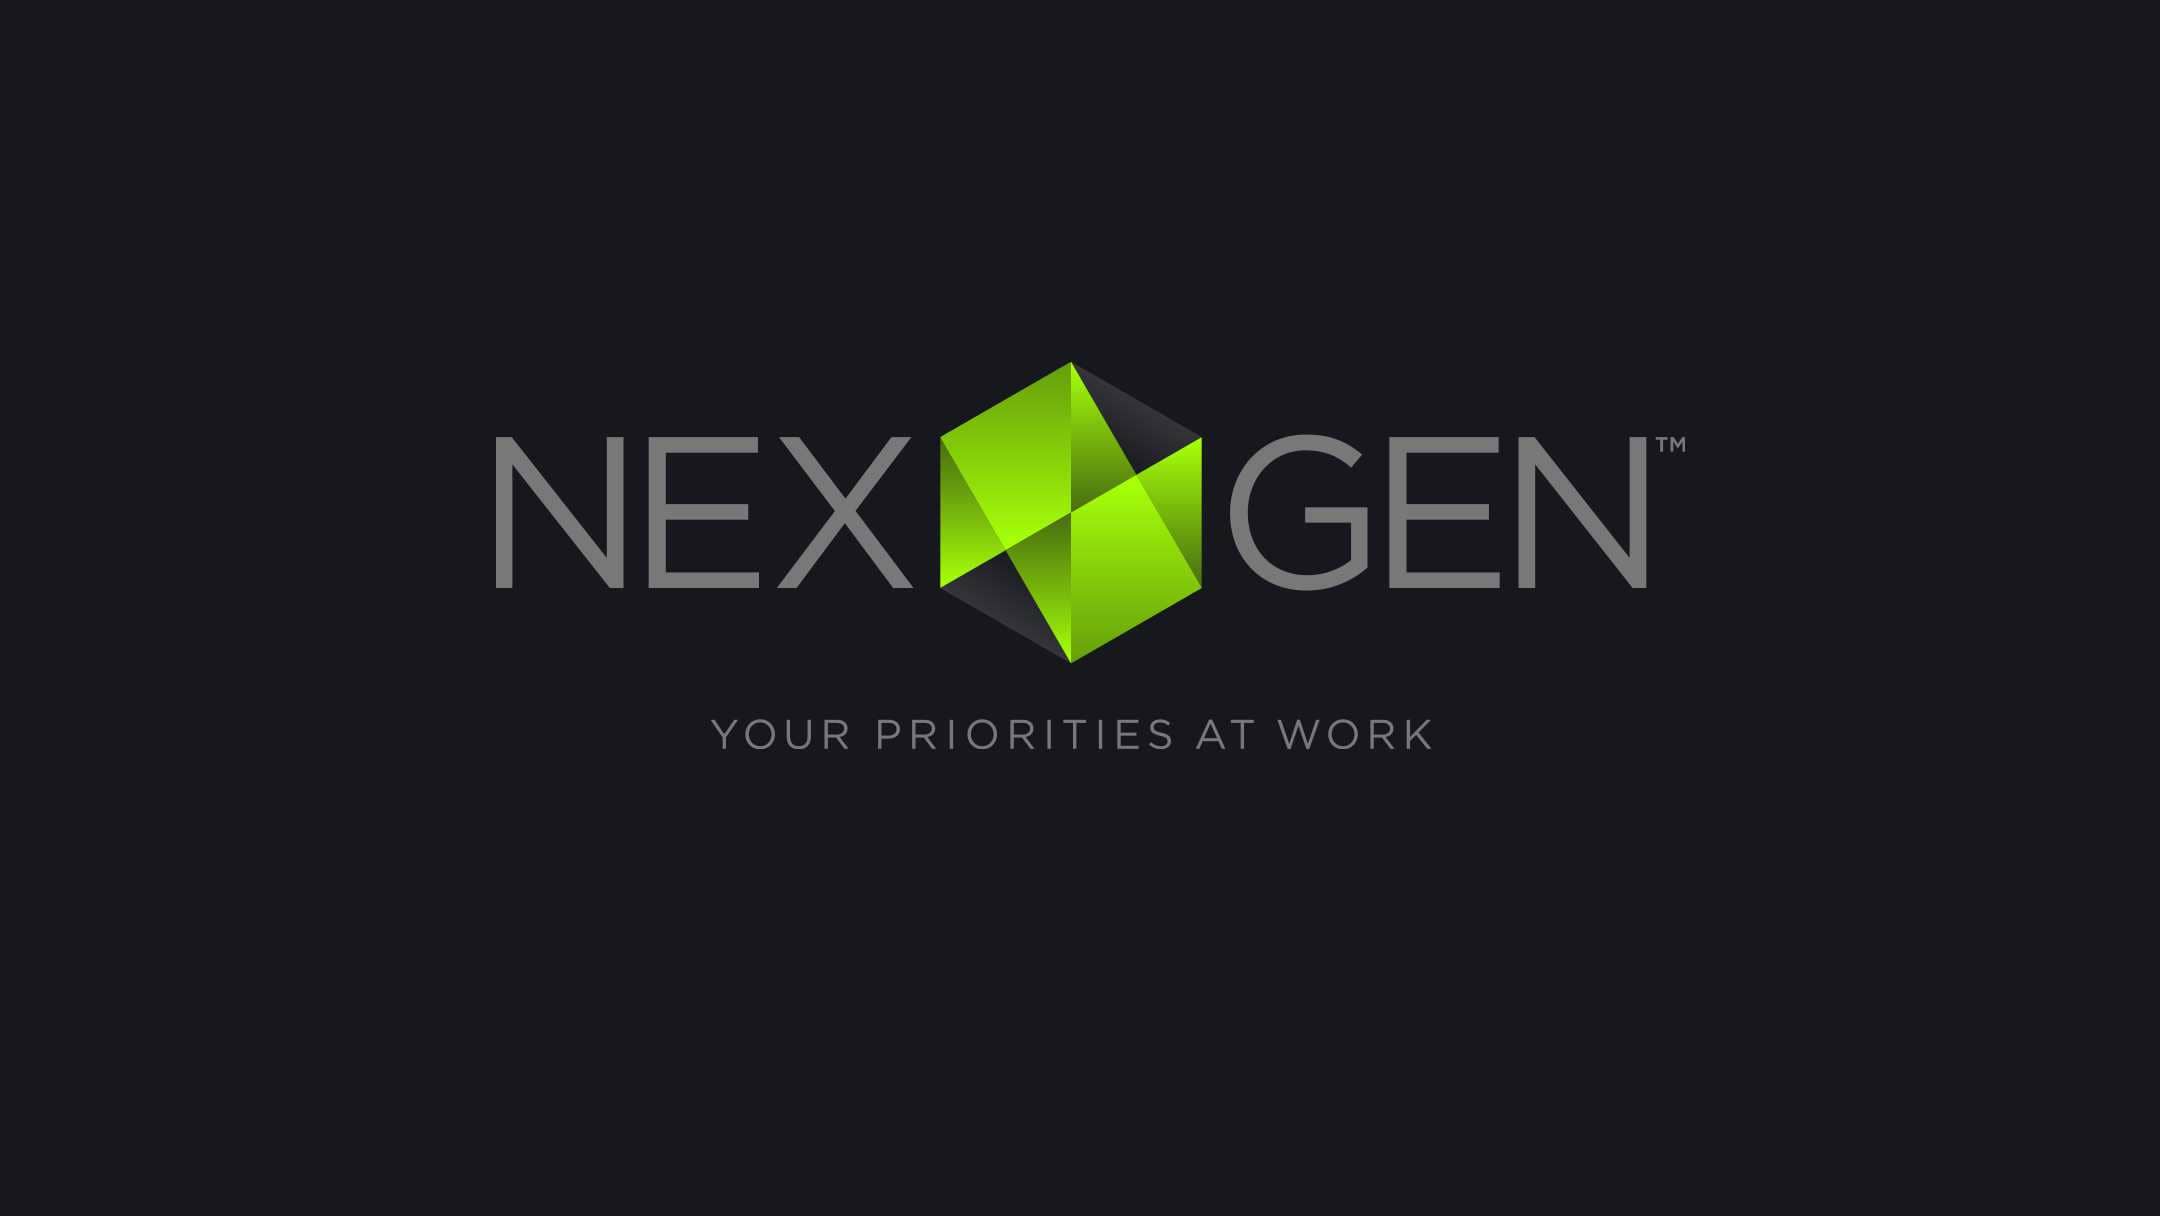 NexGen Storage: Winning attention in a highly competitive industry